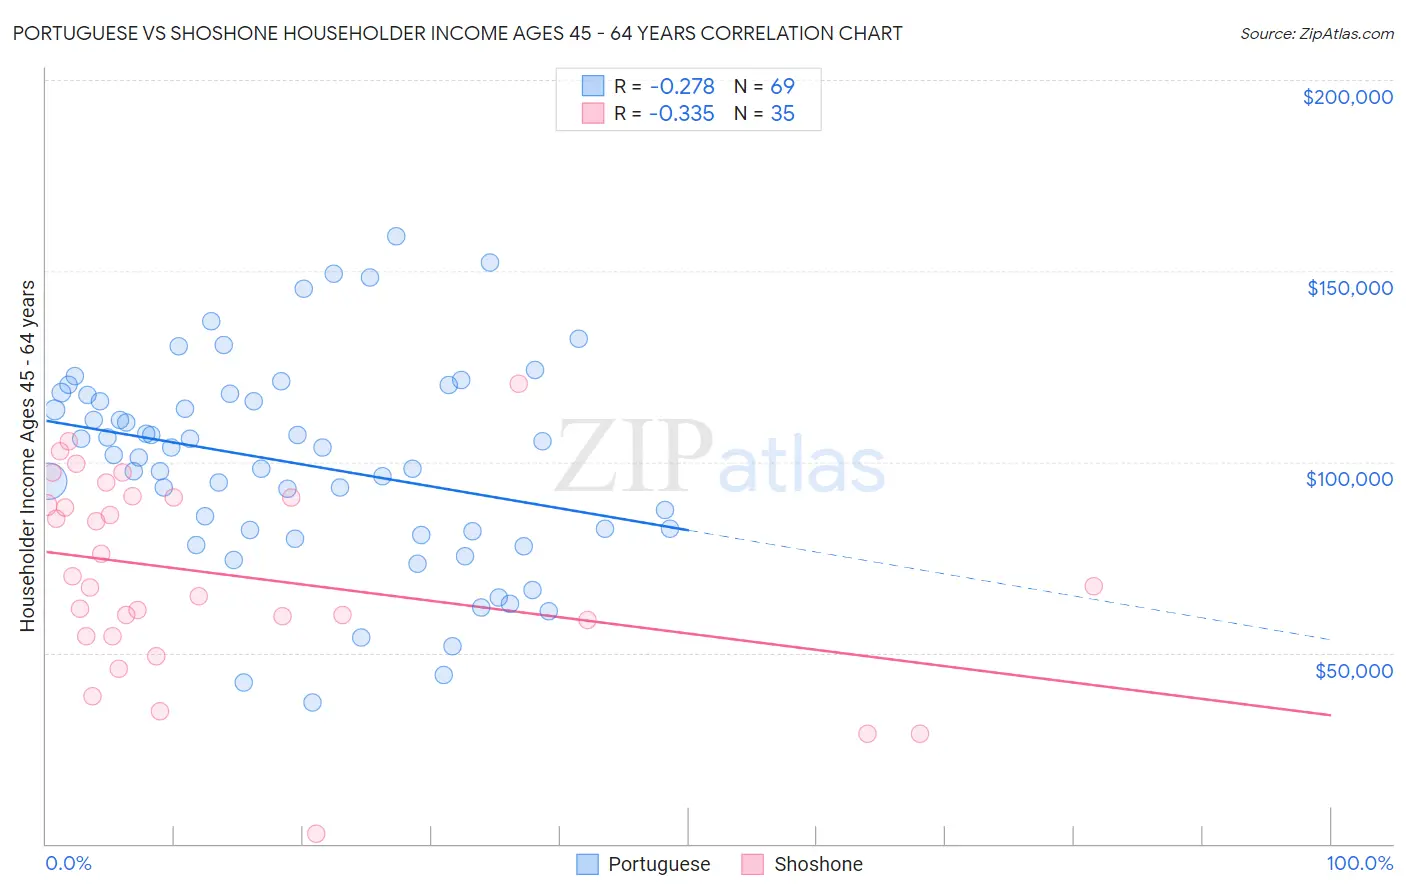 Portuguese vs Shoshone Householder Income Ages 45 - 64 years